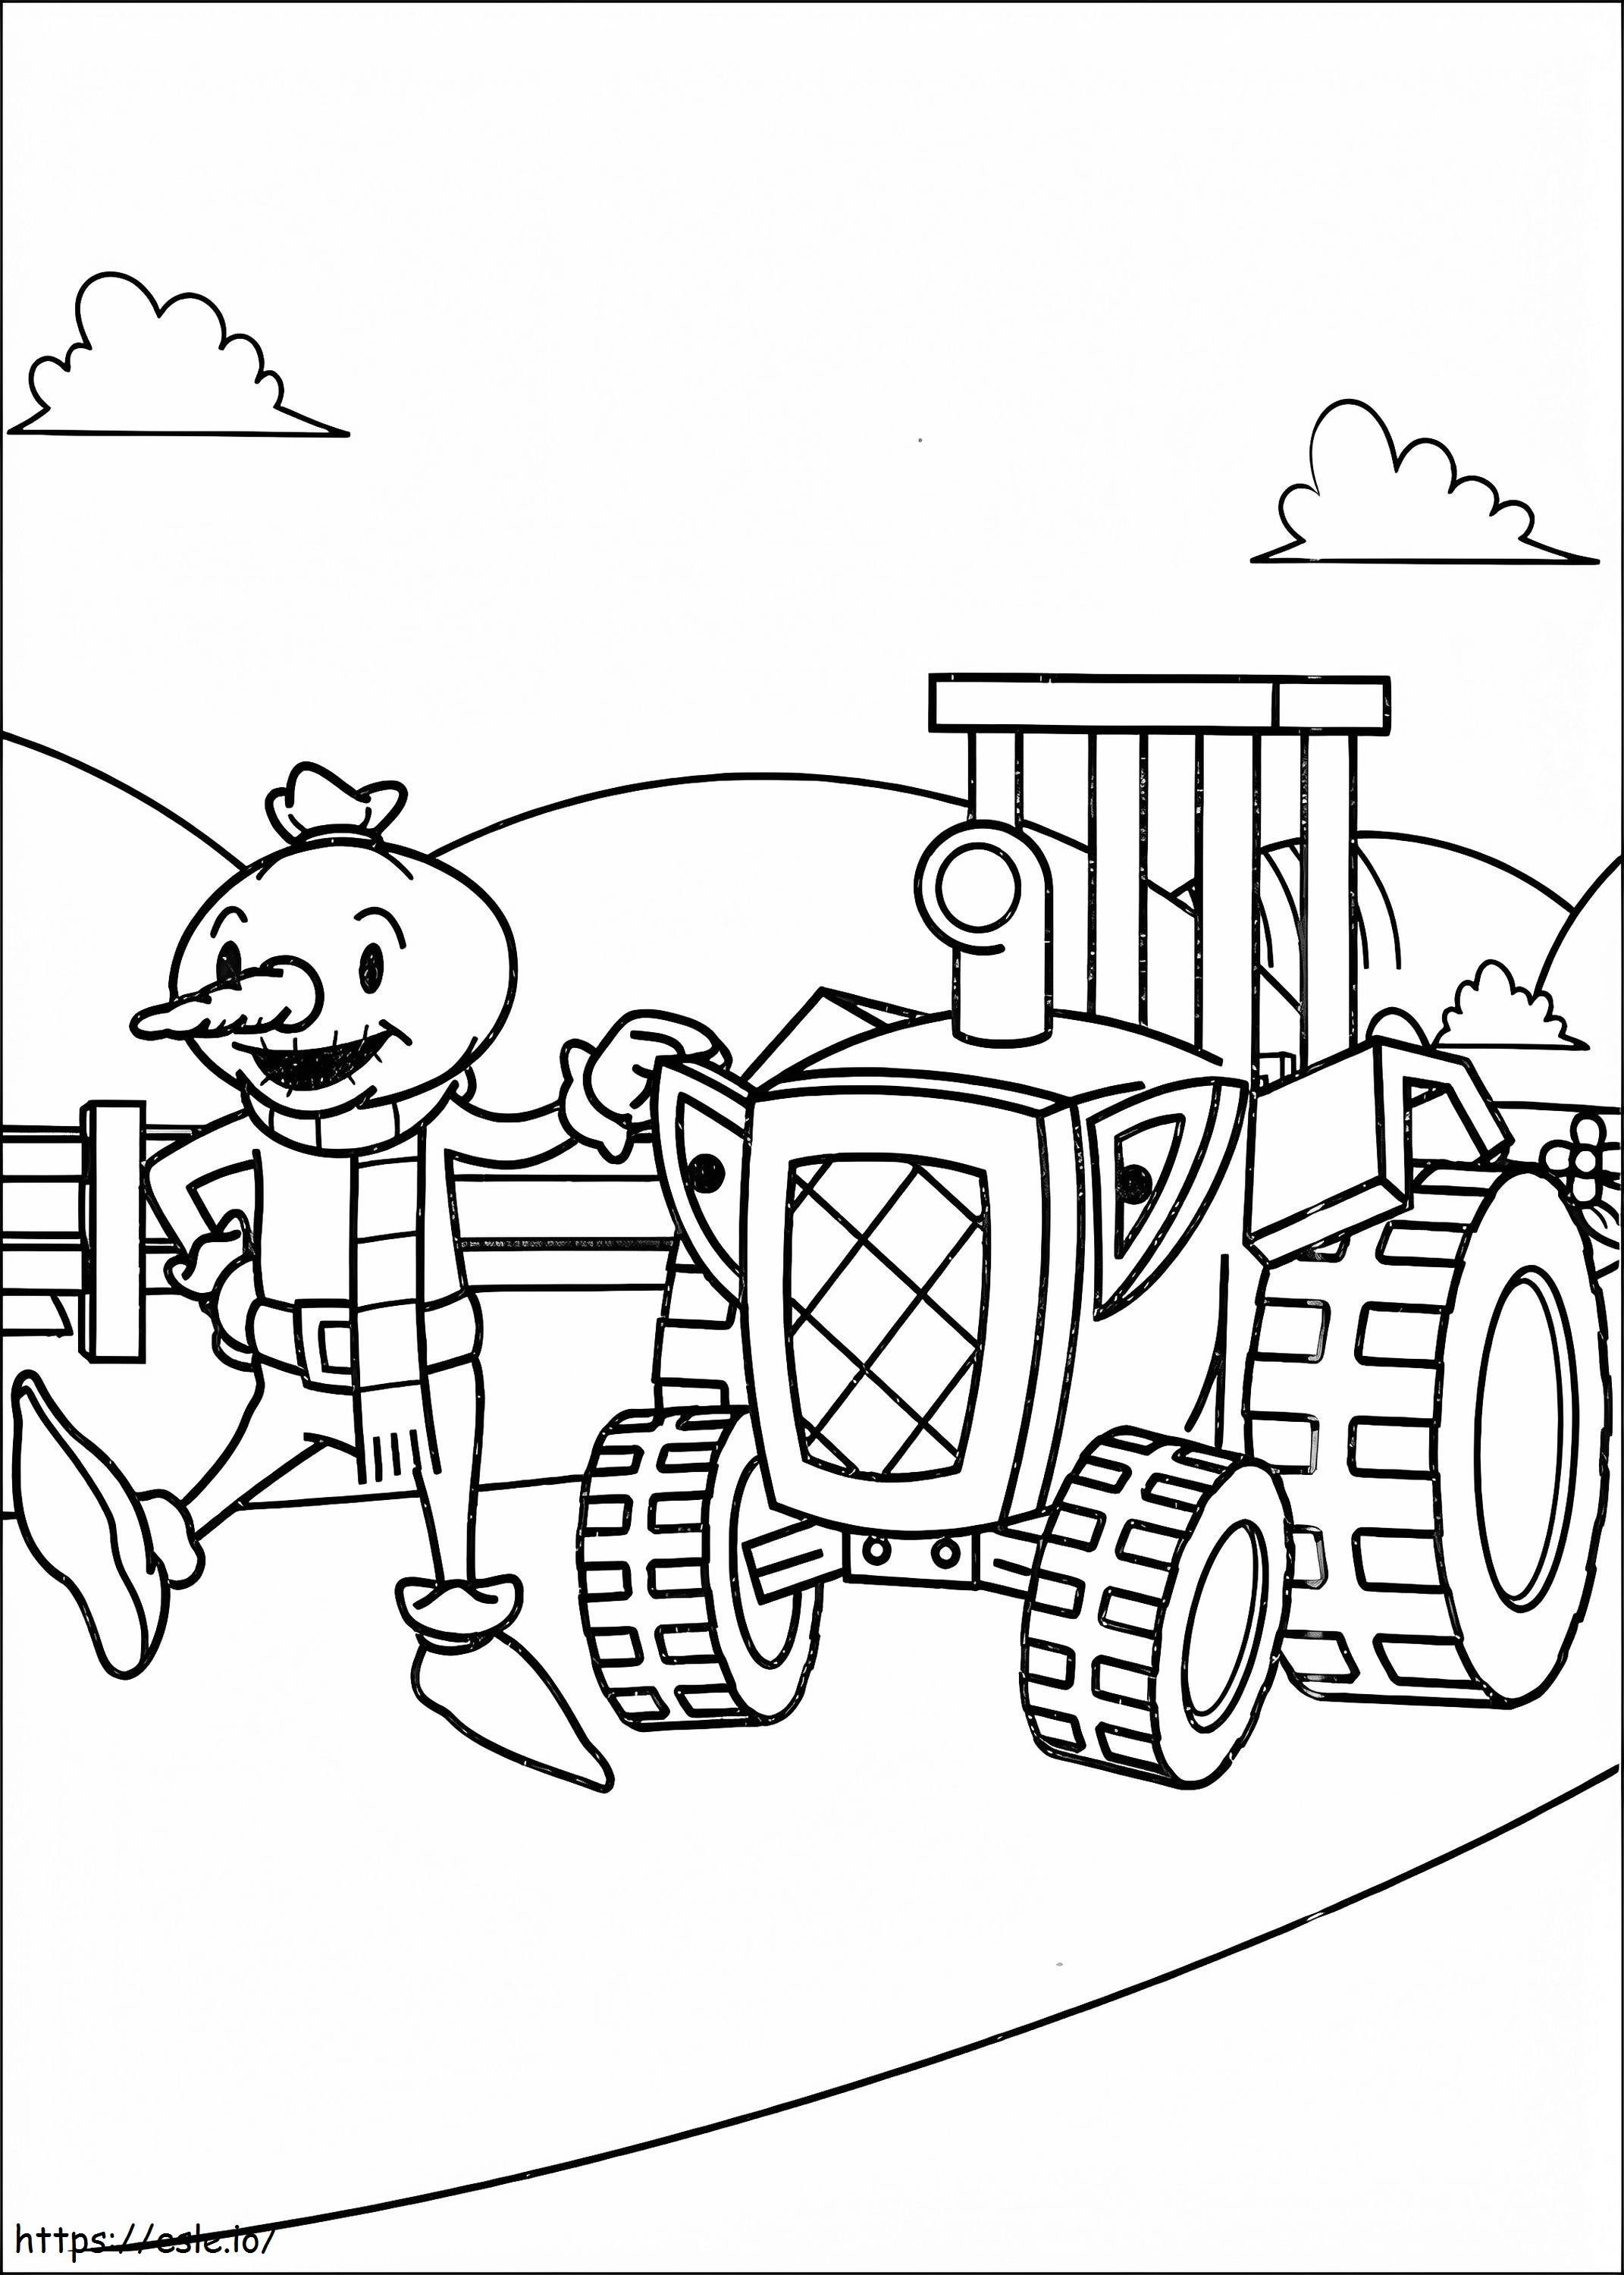 1534131280 Spud And Travis A4 coloring page